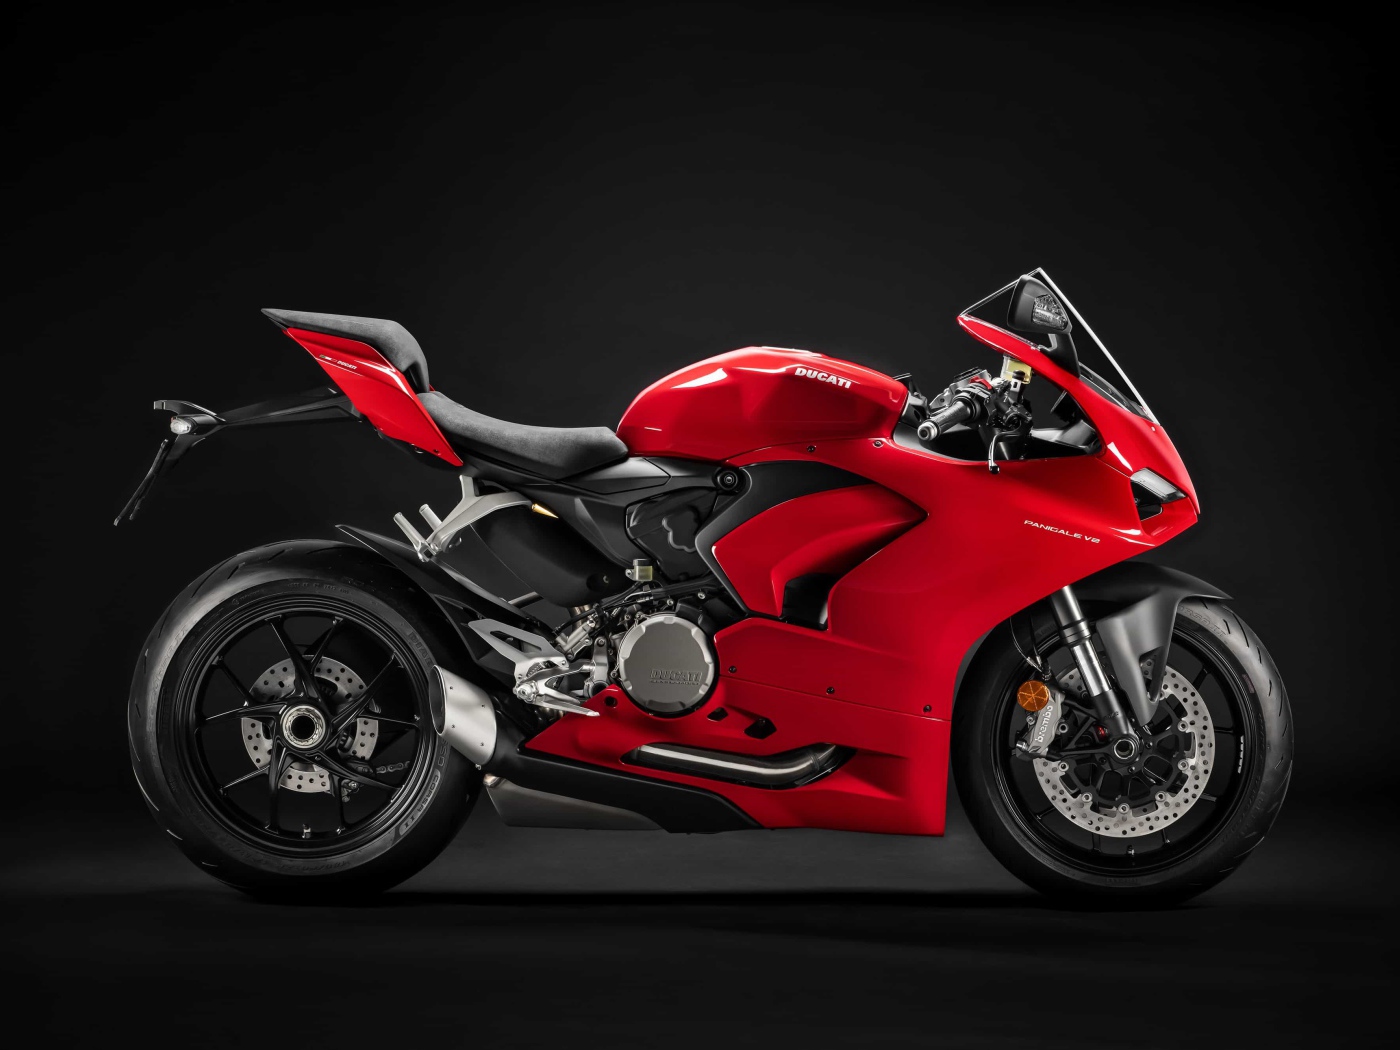 Red motorcycle Ducati Panigale v2, 2020 on a black background